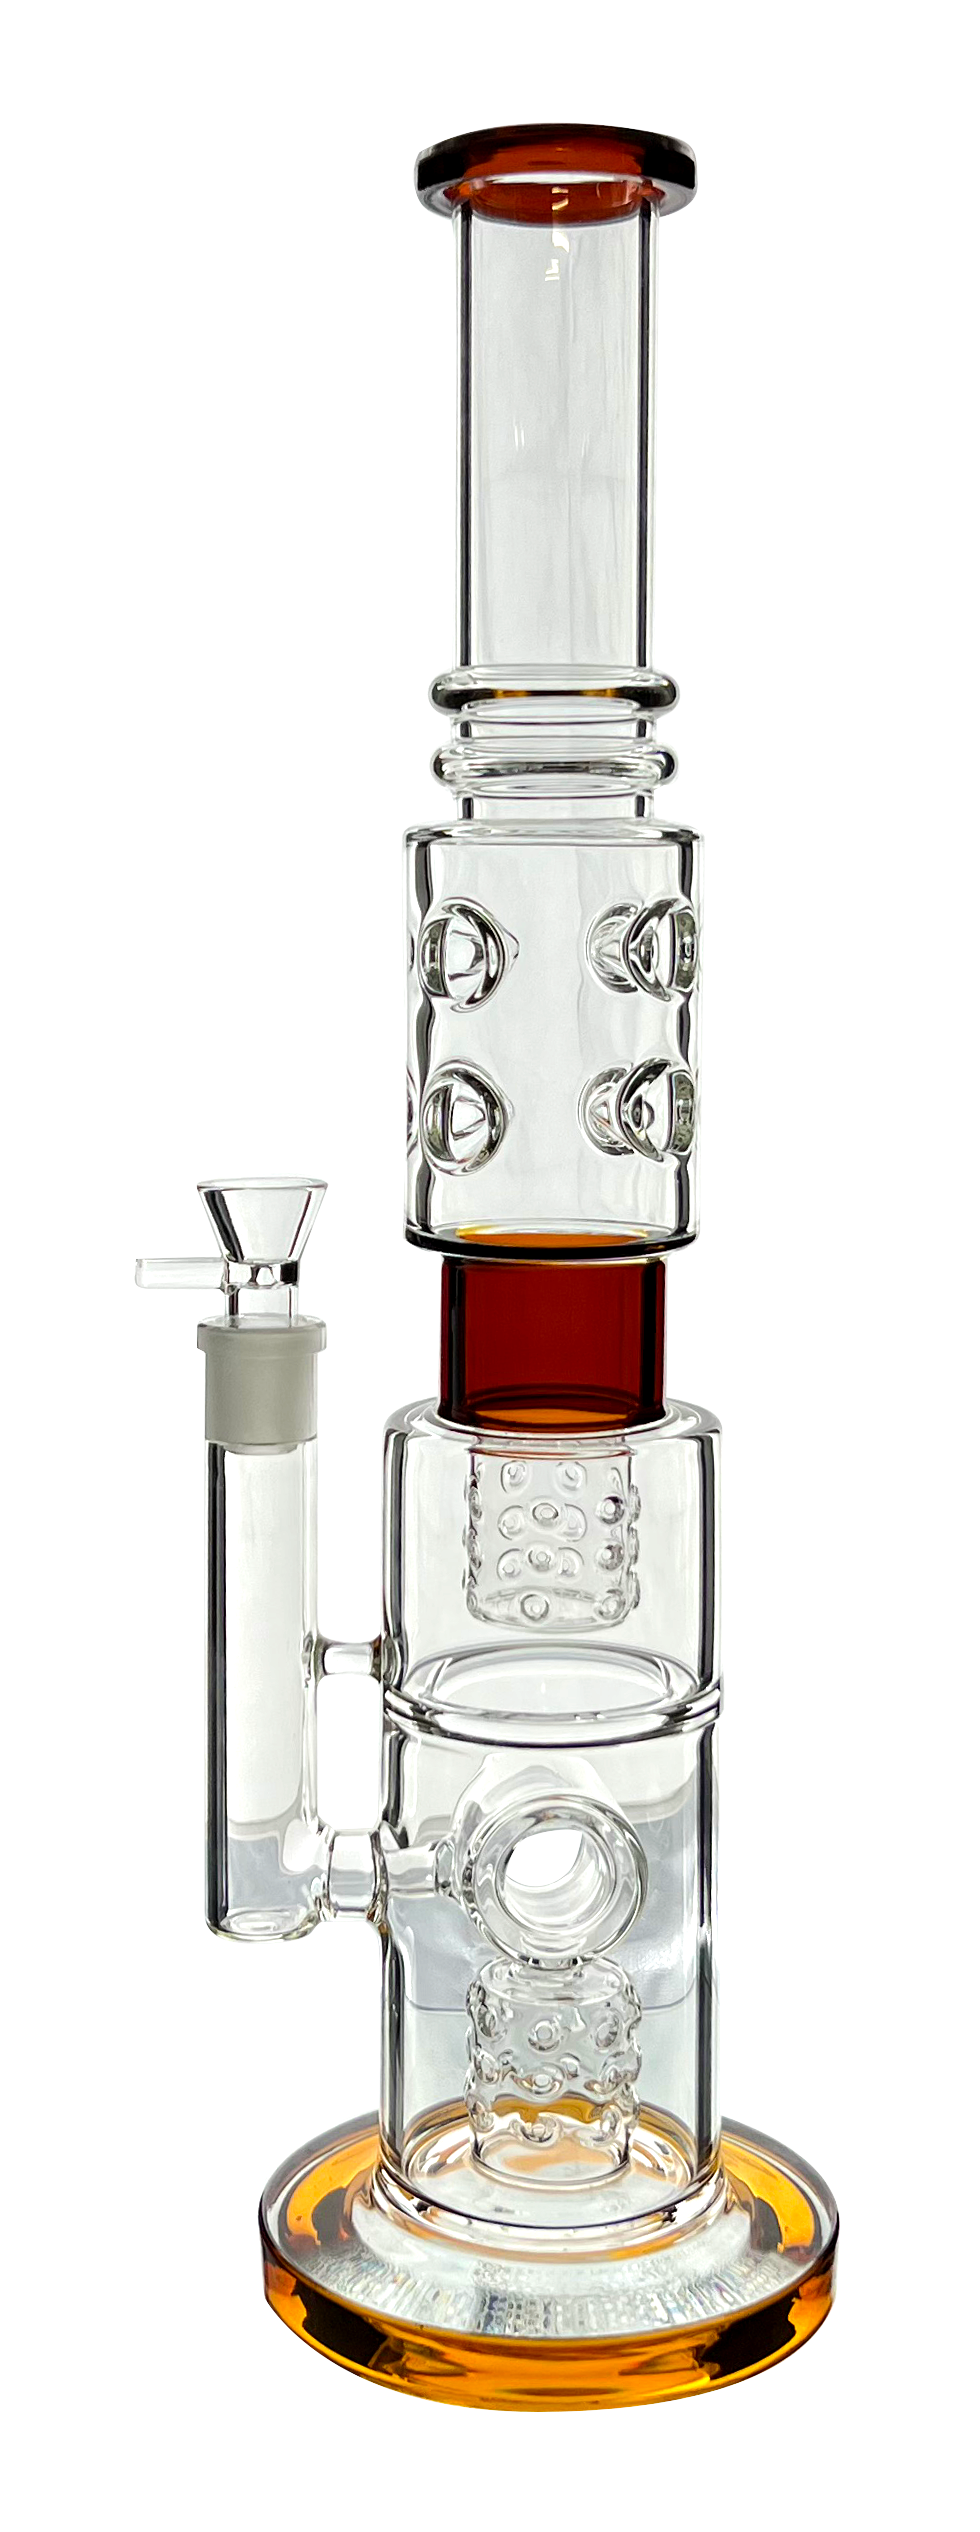 MEDIUM 2 SWISS PERC WITH DONUT RECYCLER - Limitless Puff